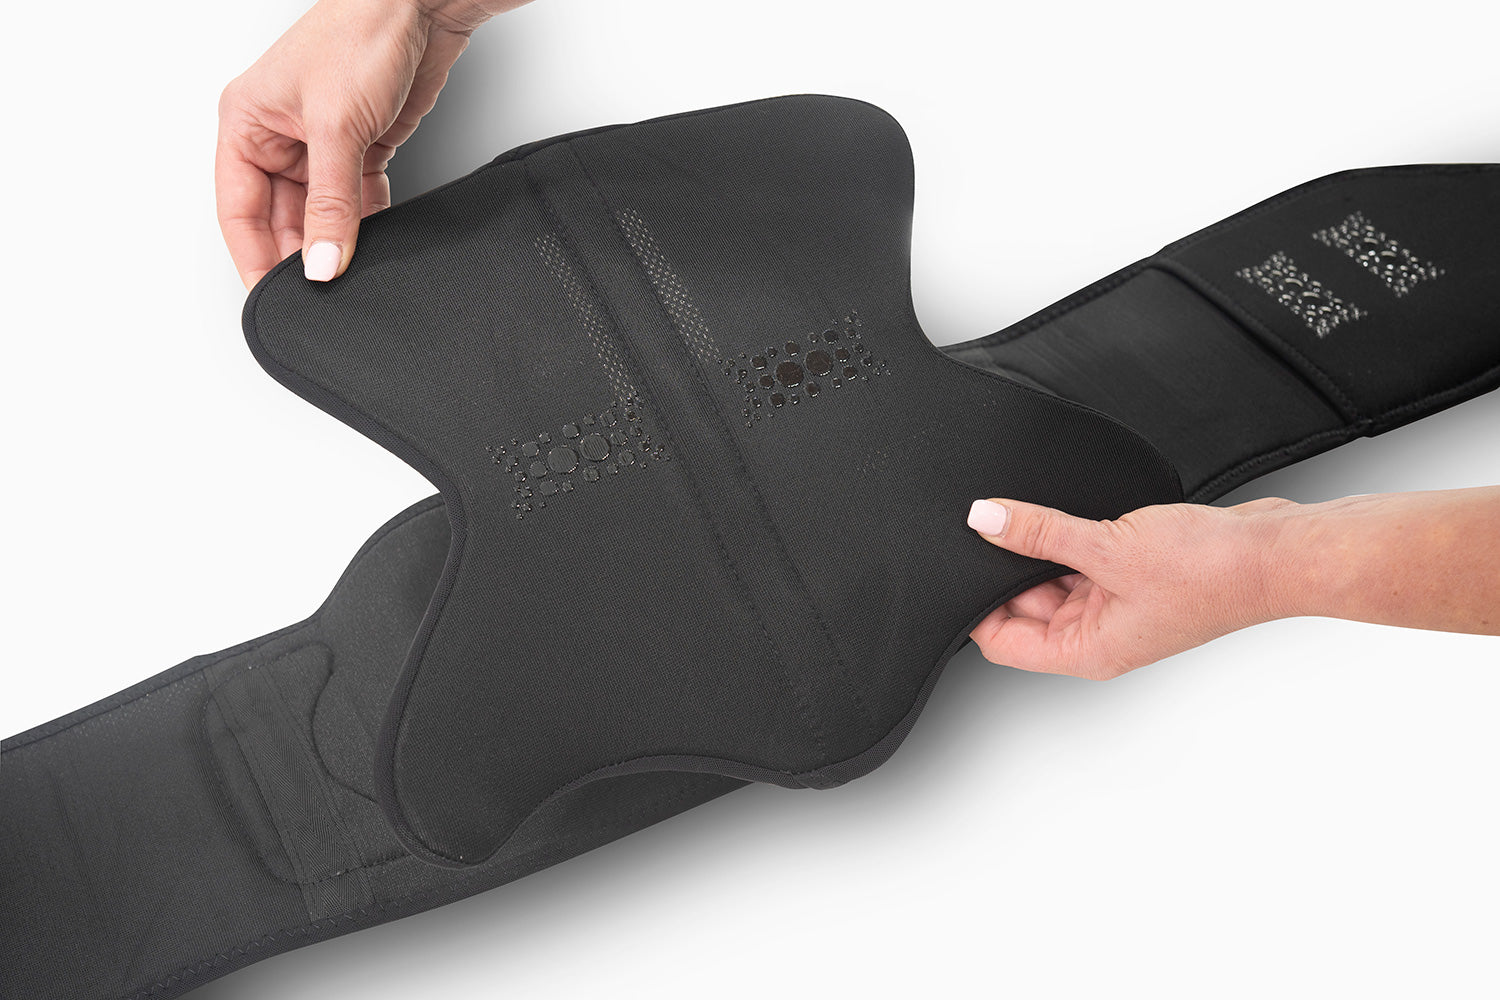 Spinal Armor  Back Pain Relief